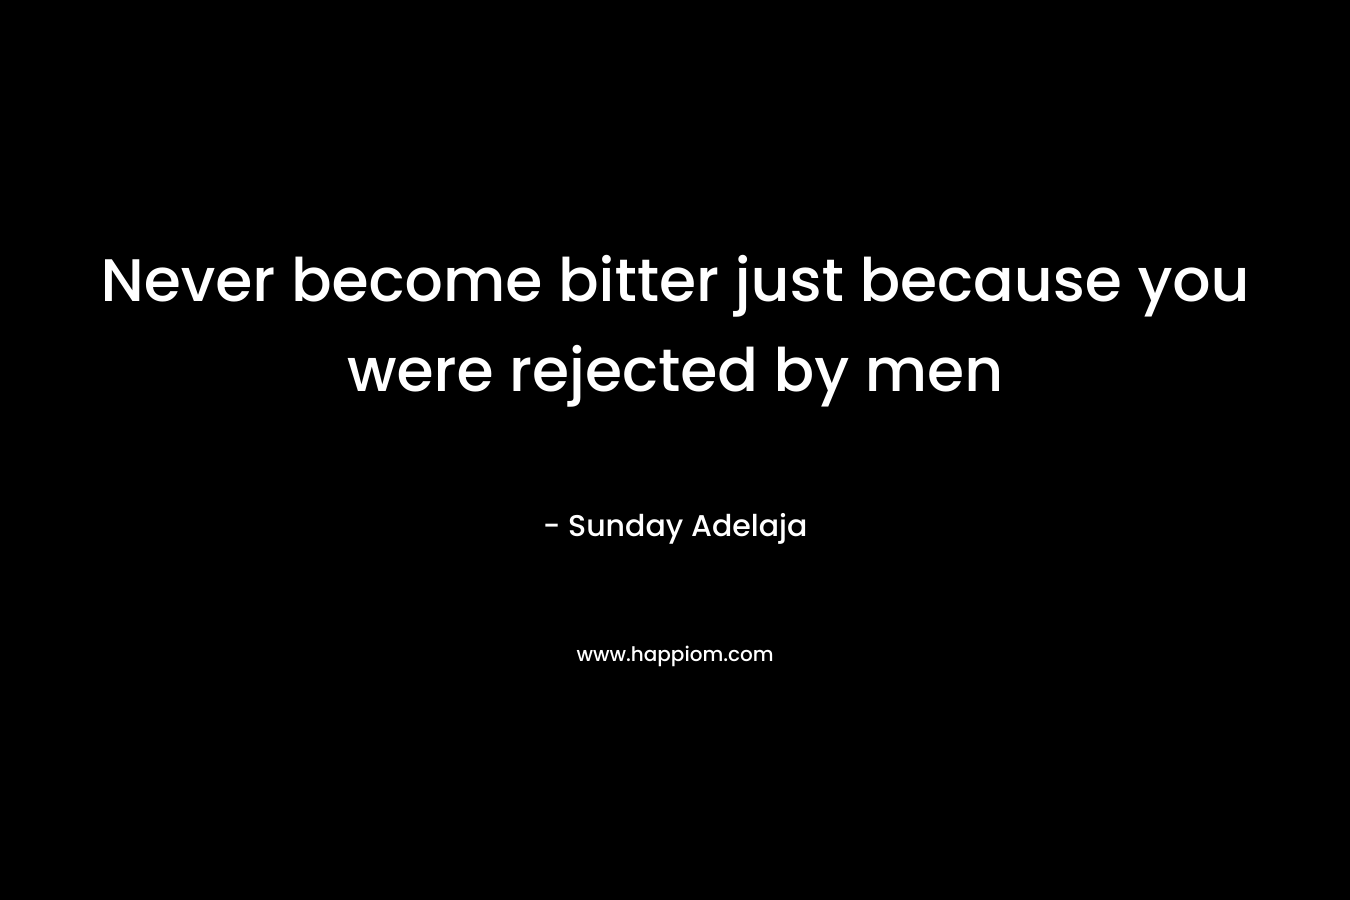 Never become bitter just because you were rejected by men